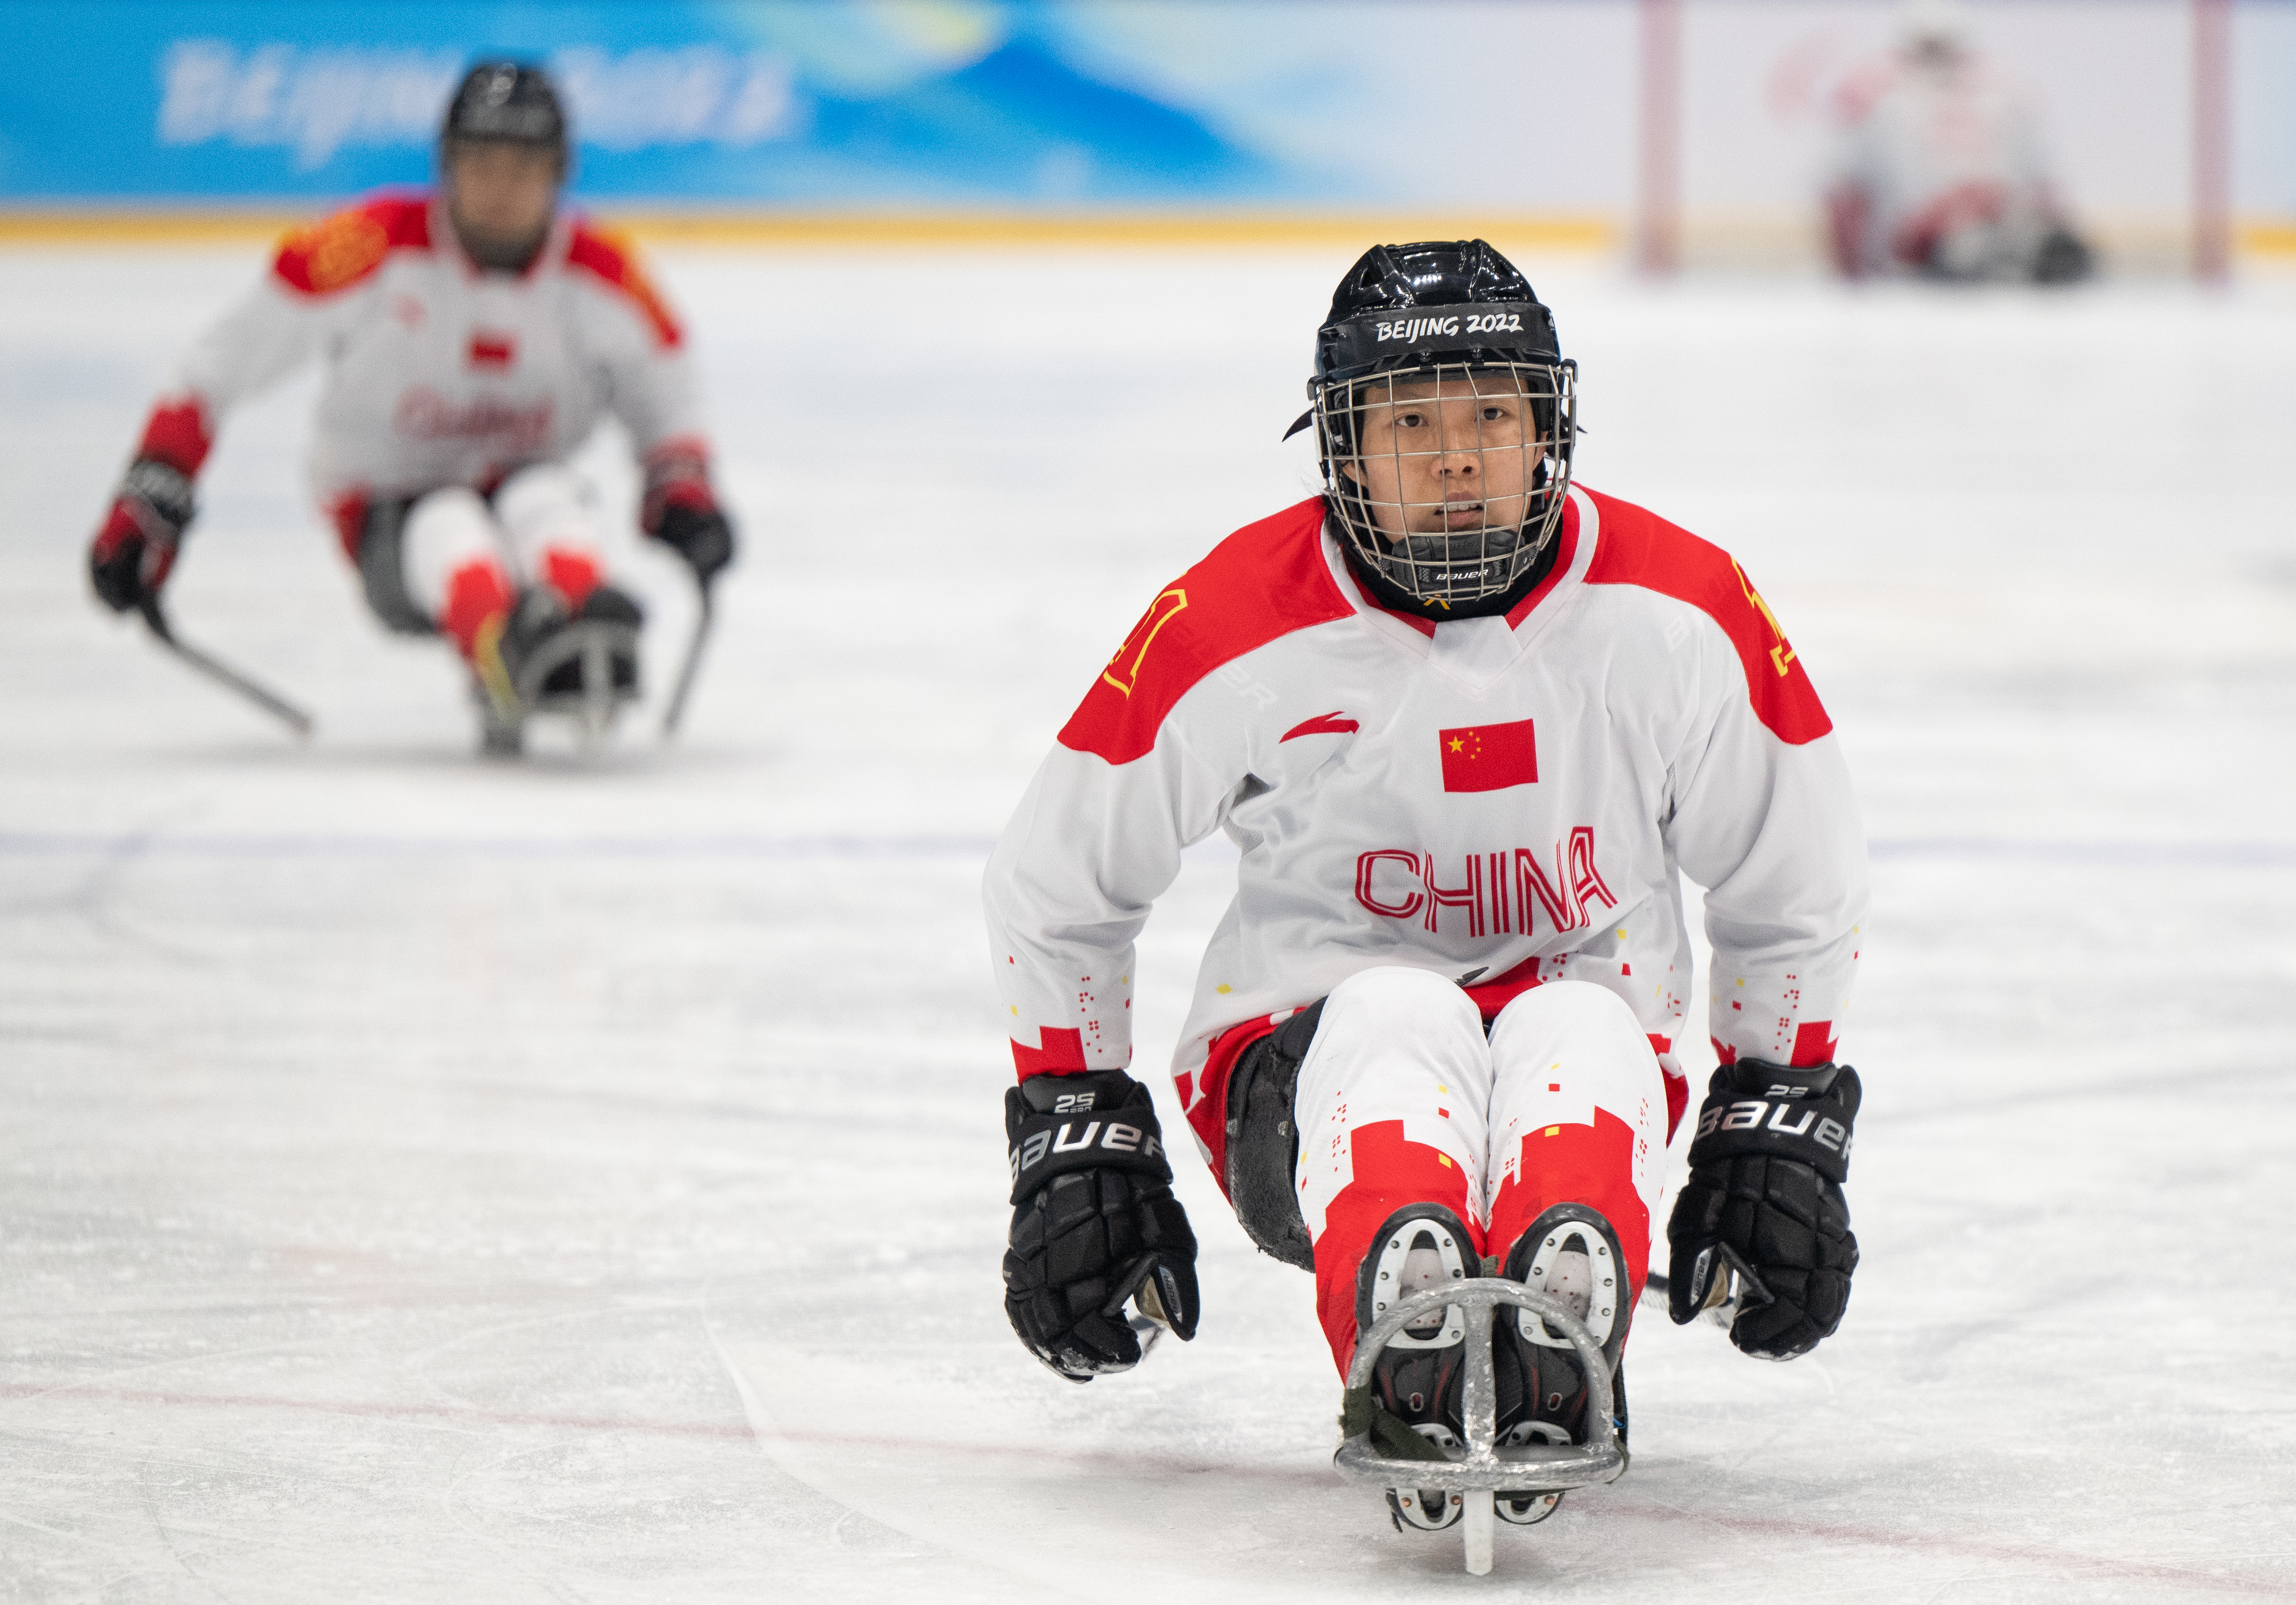 Jing Yu CHN during the Para Ice Hockey Preliminary Round Group B - China vs Italy at The National Indoor Stadium. Beijing 2022 Winter Paralympic Games, Beijing, China, Tuesday 08 March 2022. Photo: OIS/Joel Marklund. Handout image supplied by OIS/IOC